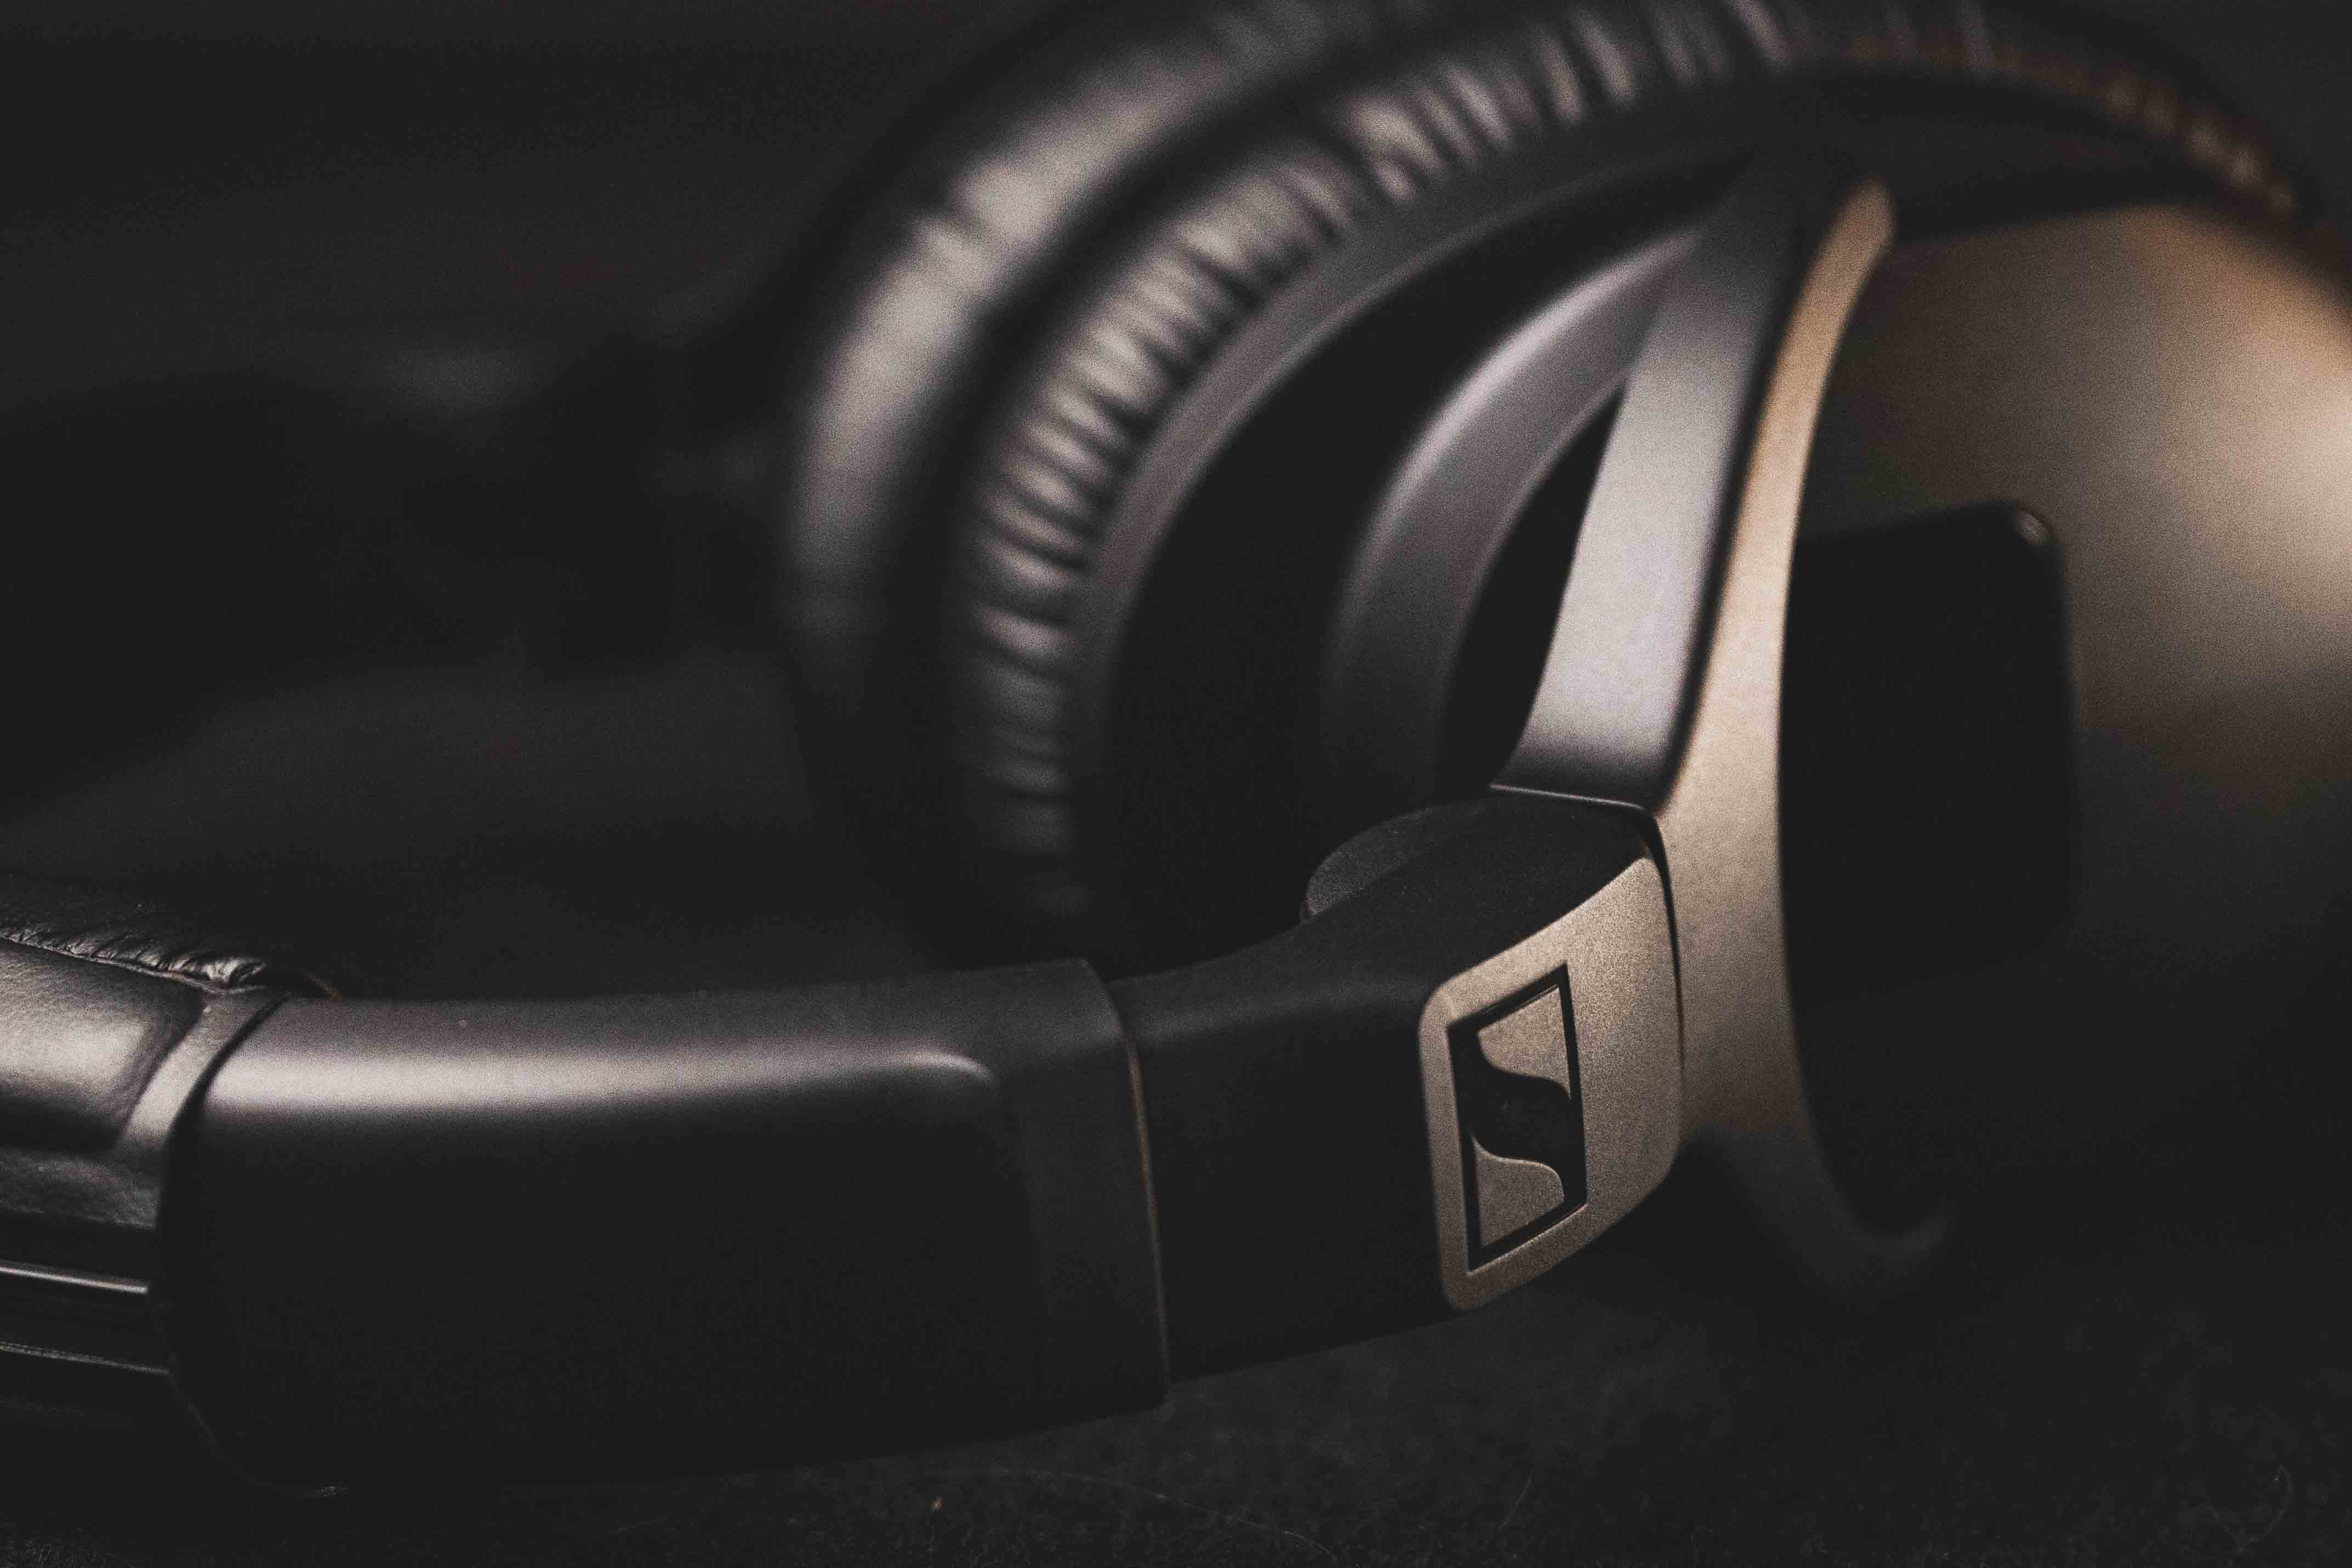 Sennheiser offers some of the best audio equipment on the market - we should know - we use their kit all the time. Together, with Sennheiser, we've highlighted some key products to look out for!